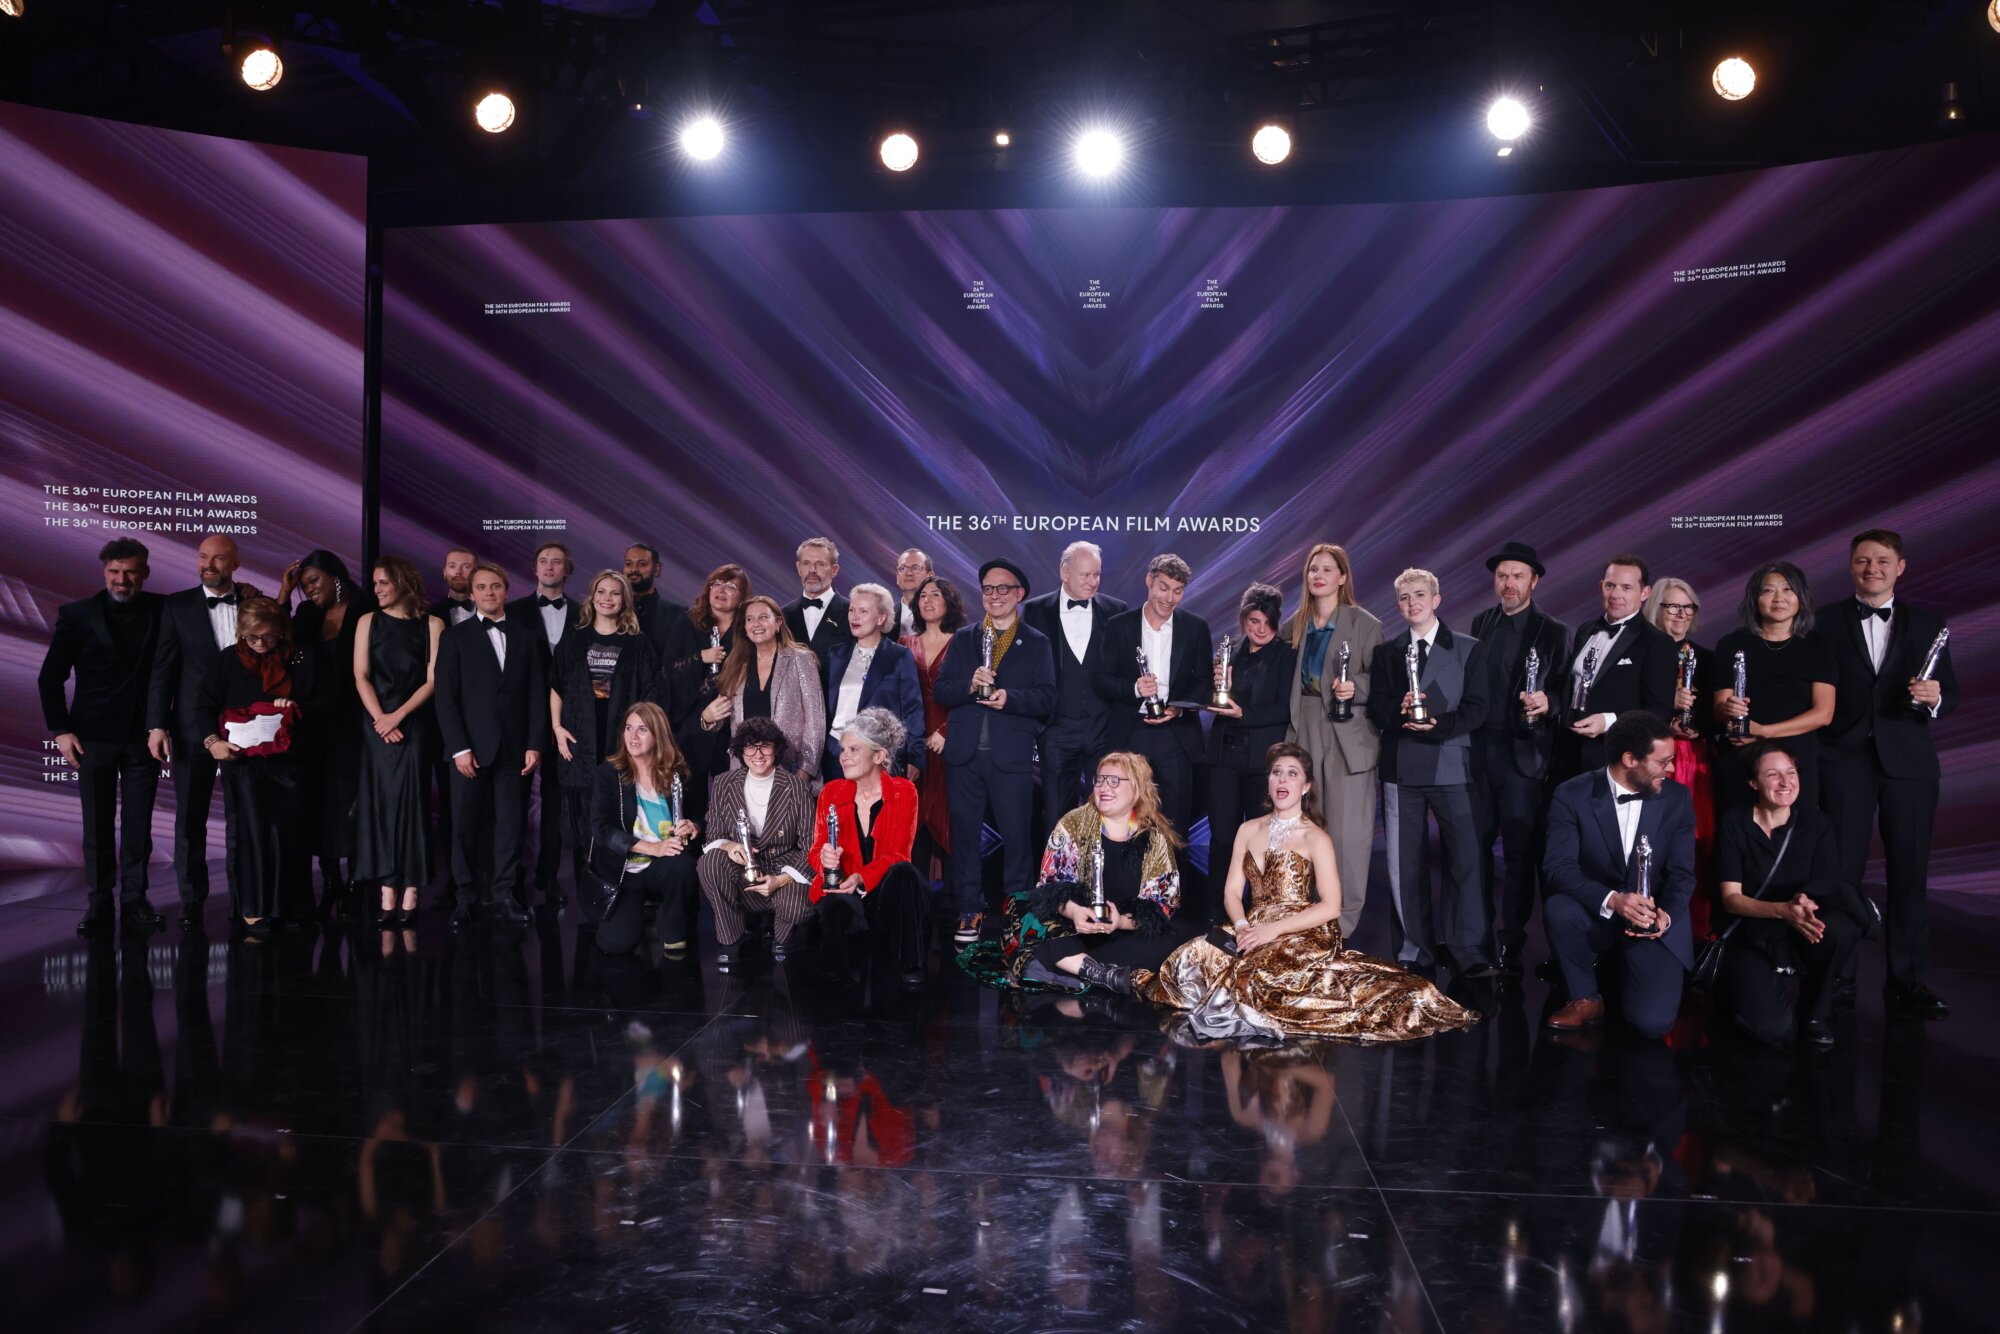 Winners of the 36th edition of the European Film Awards